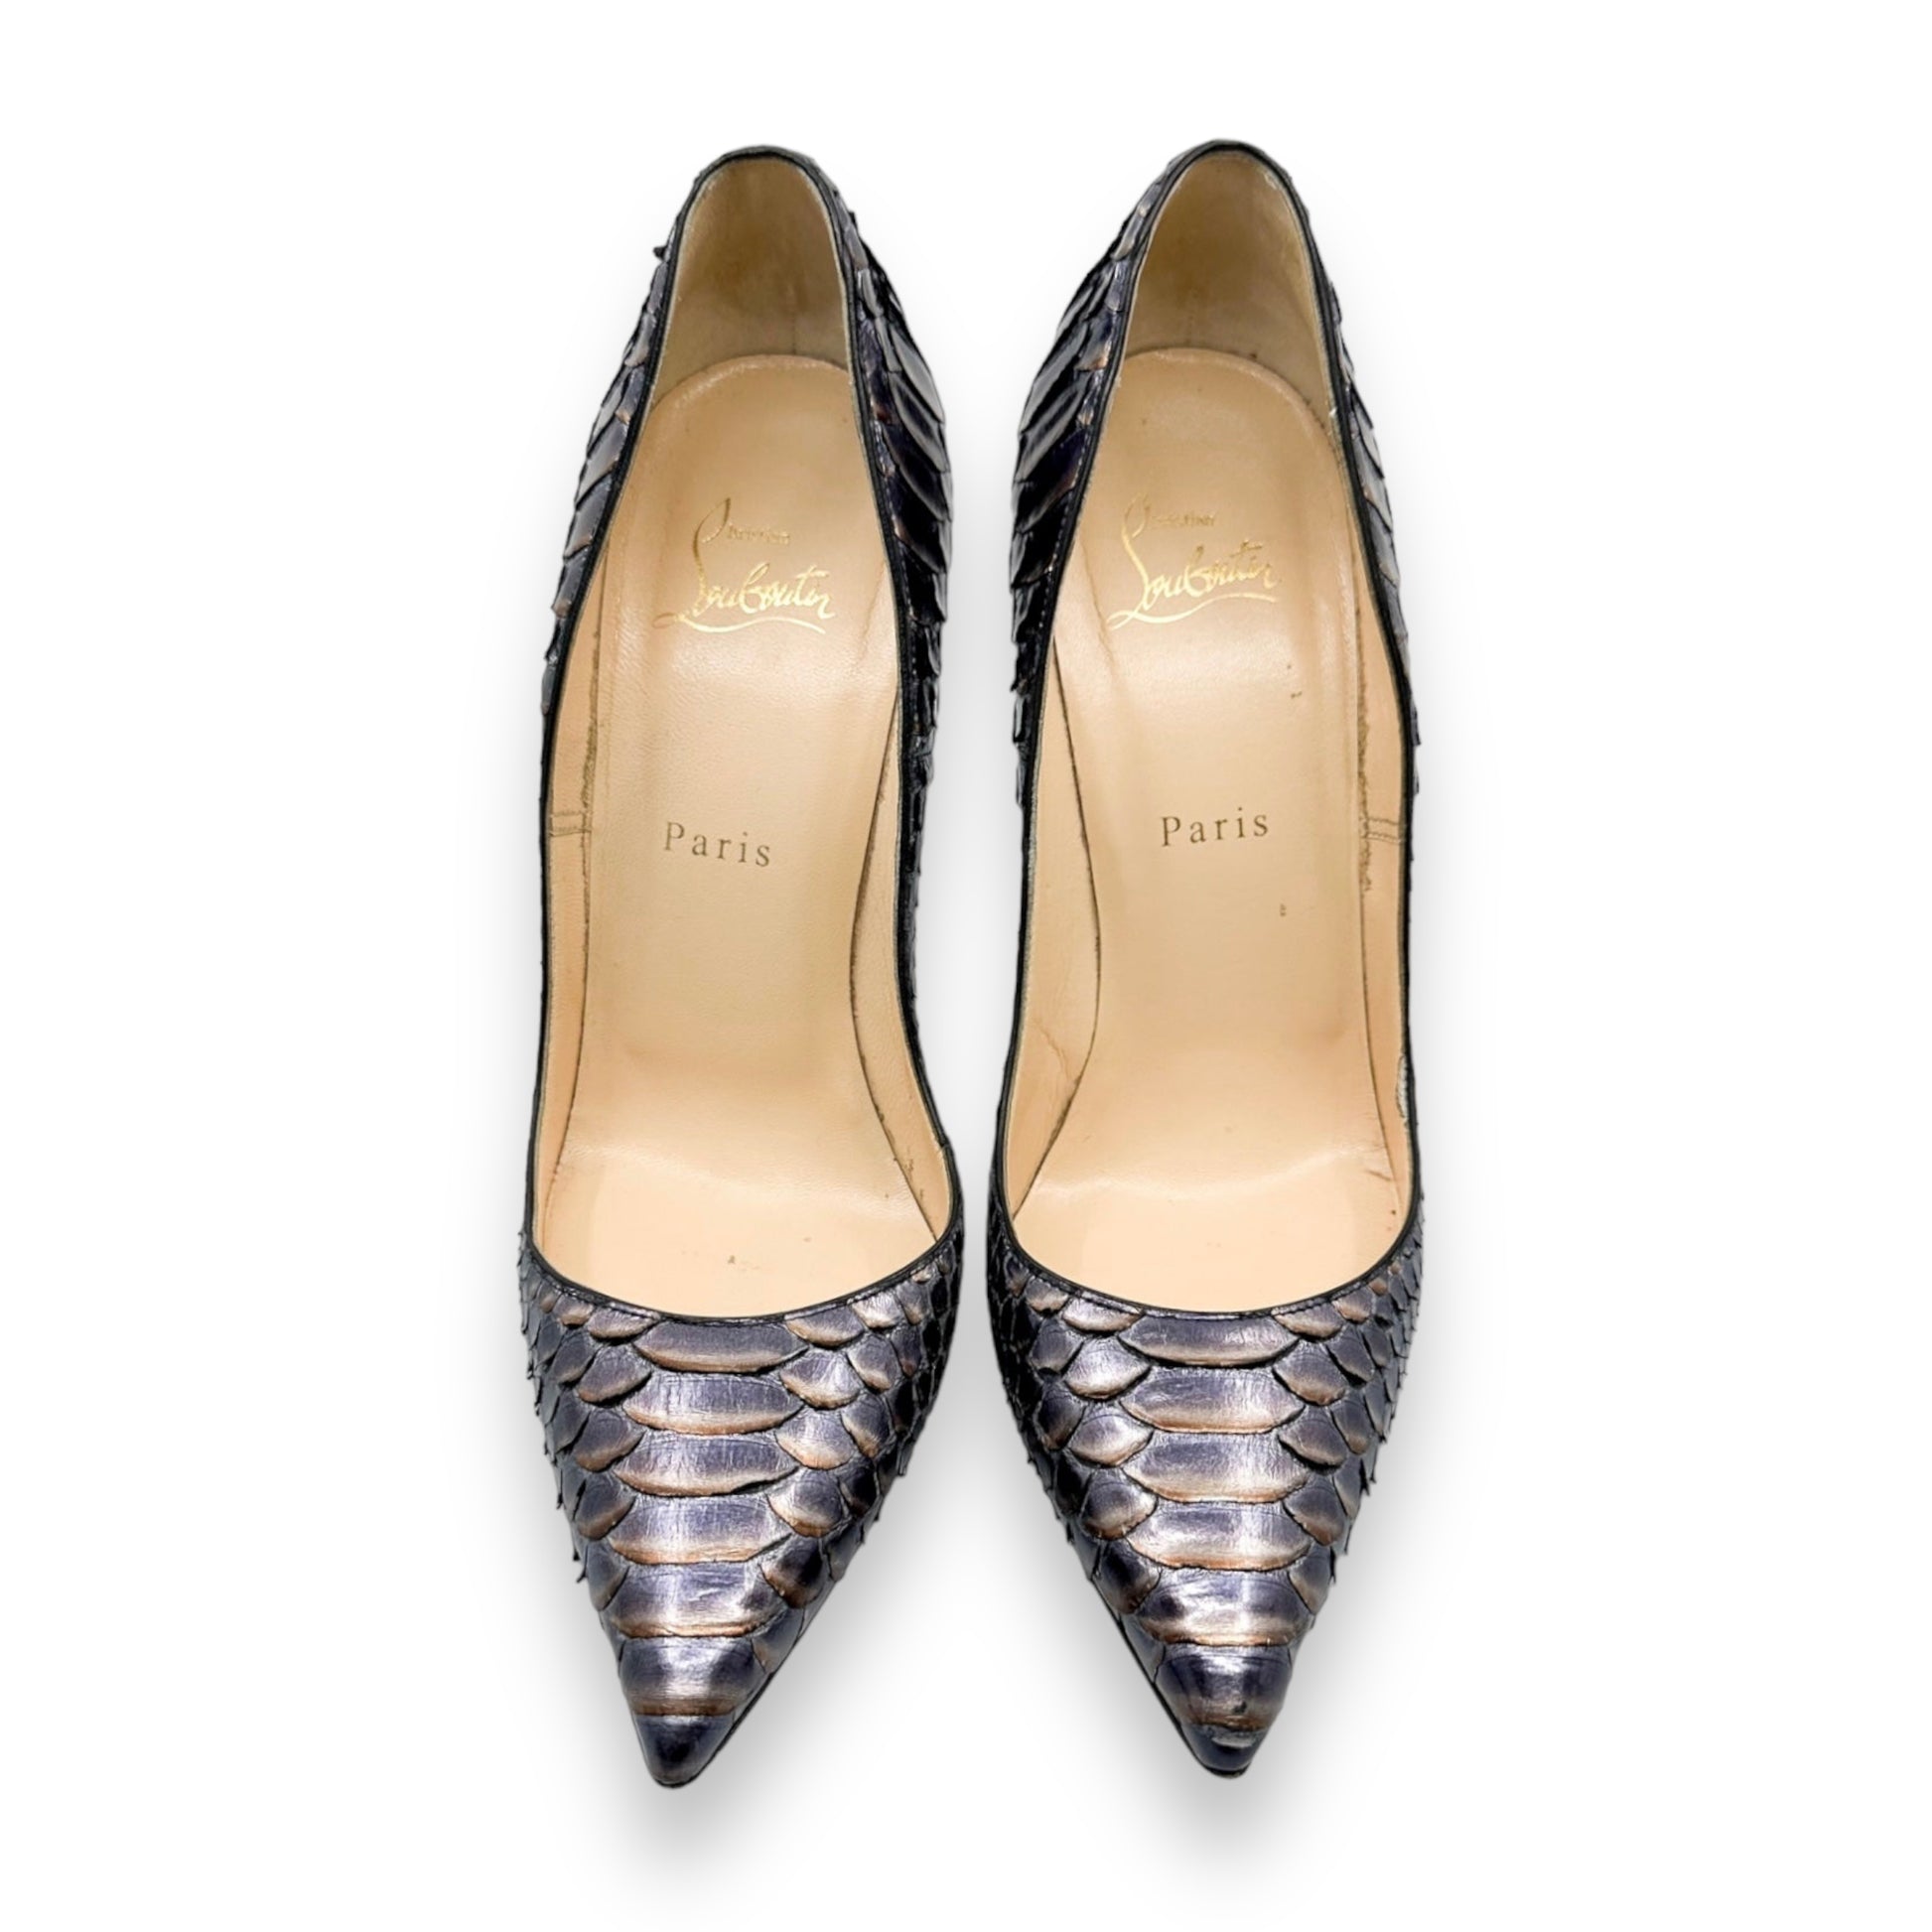 The Christian Louboutin “So Kate” Pumps by Laurence Ourac